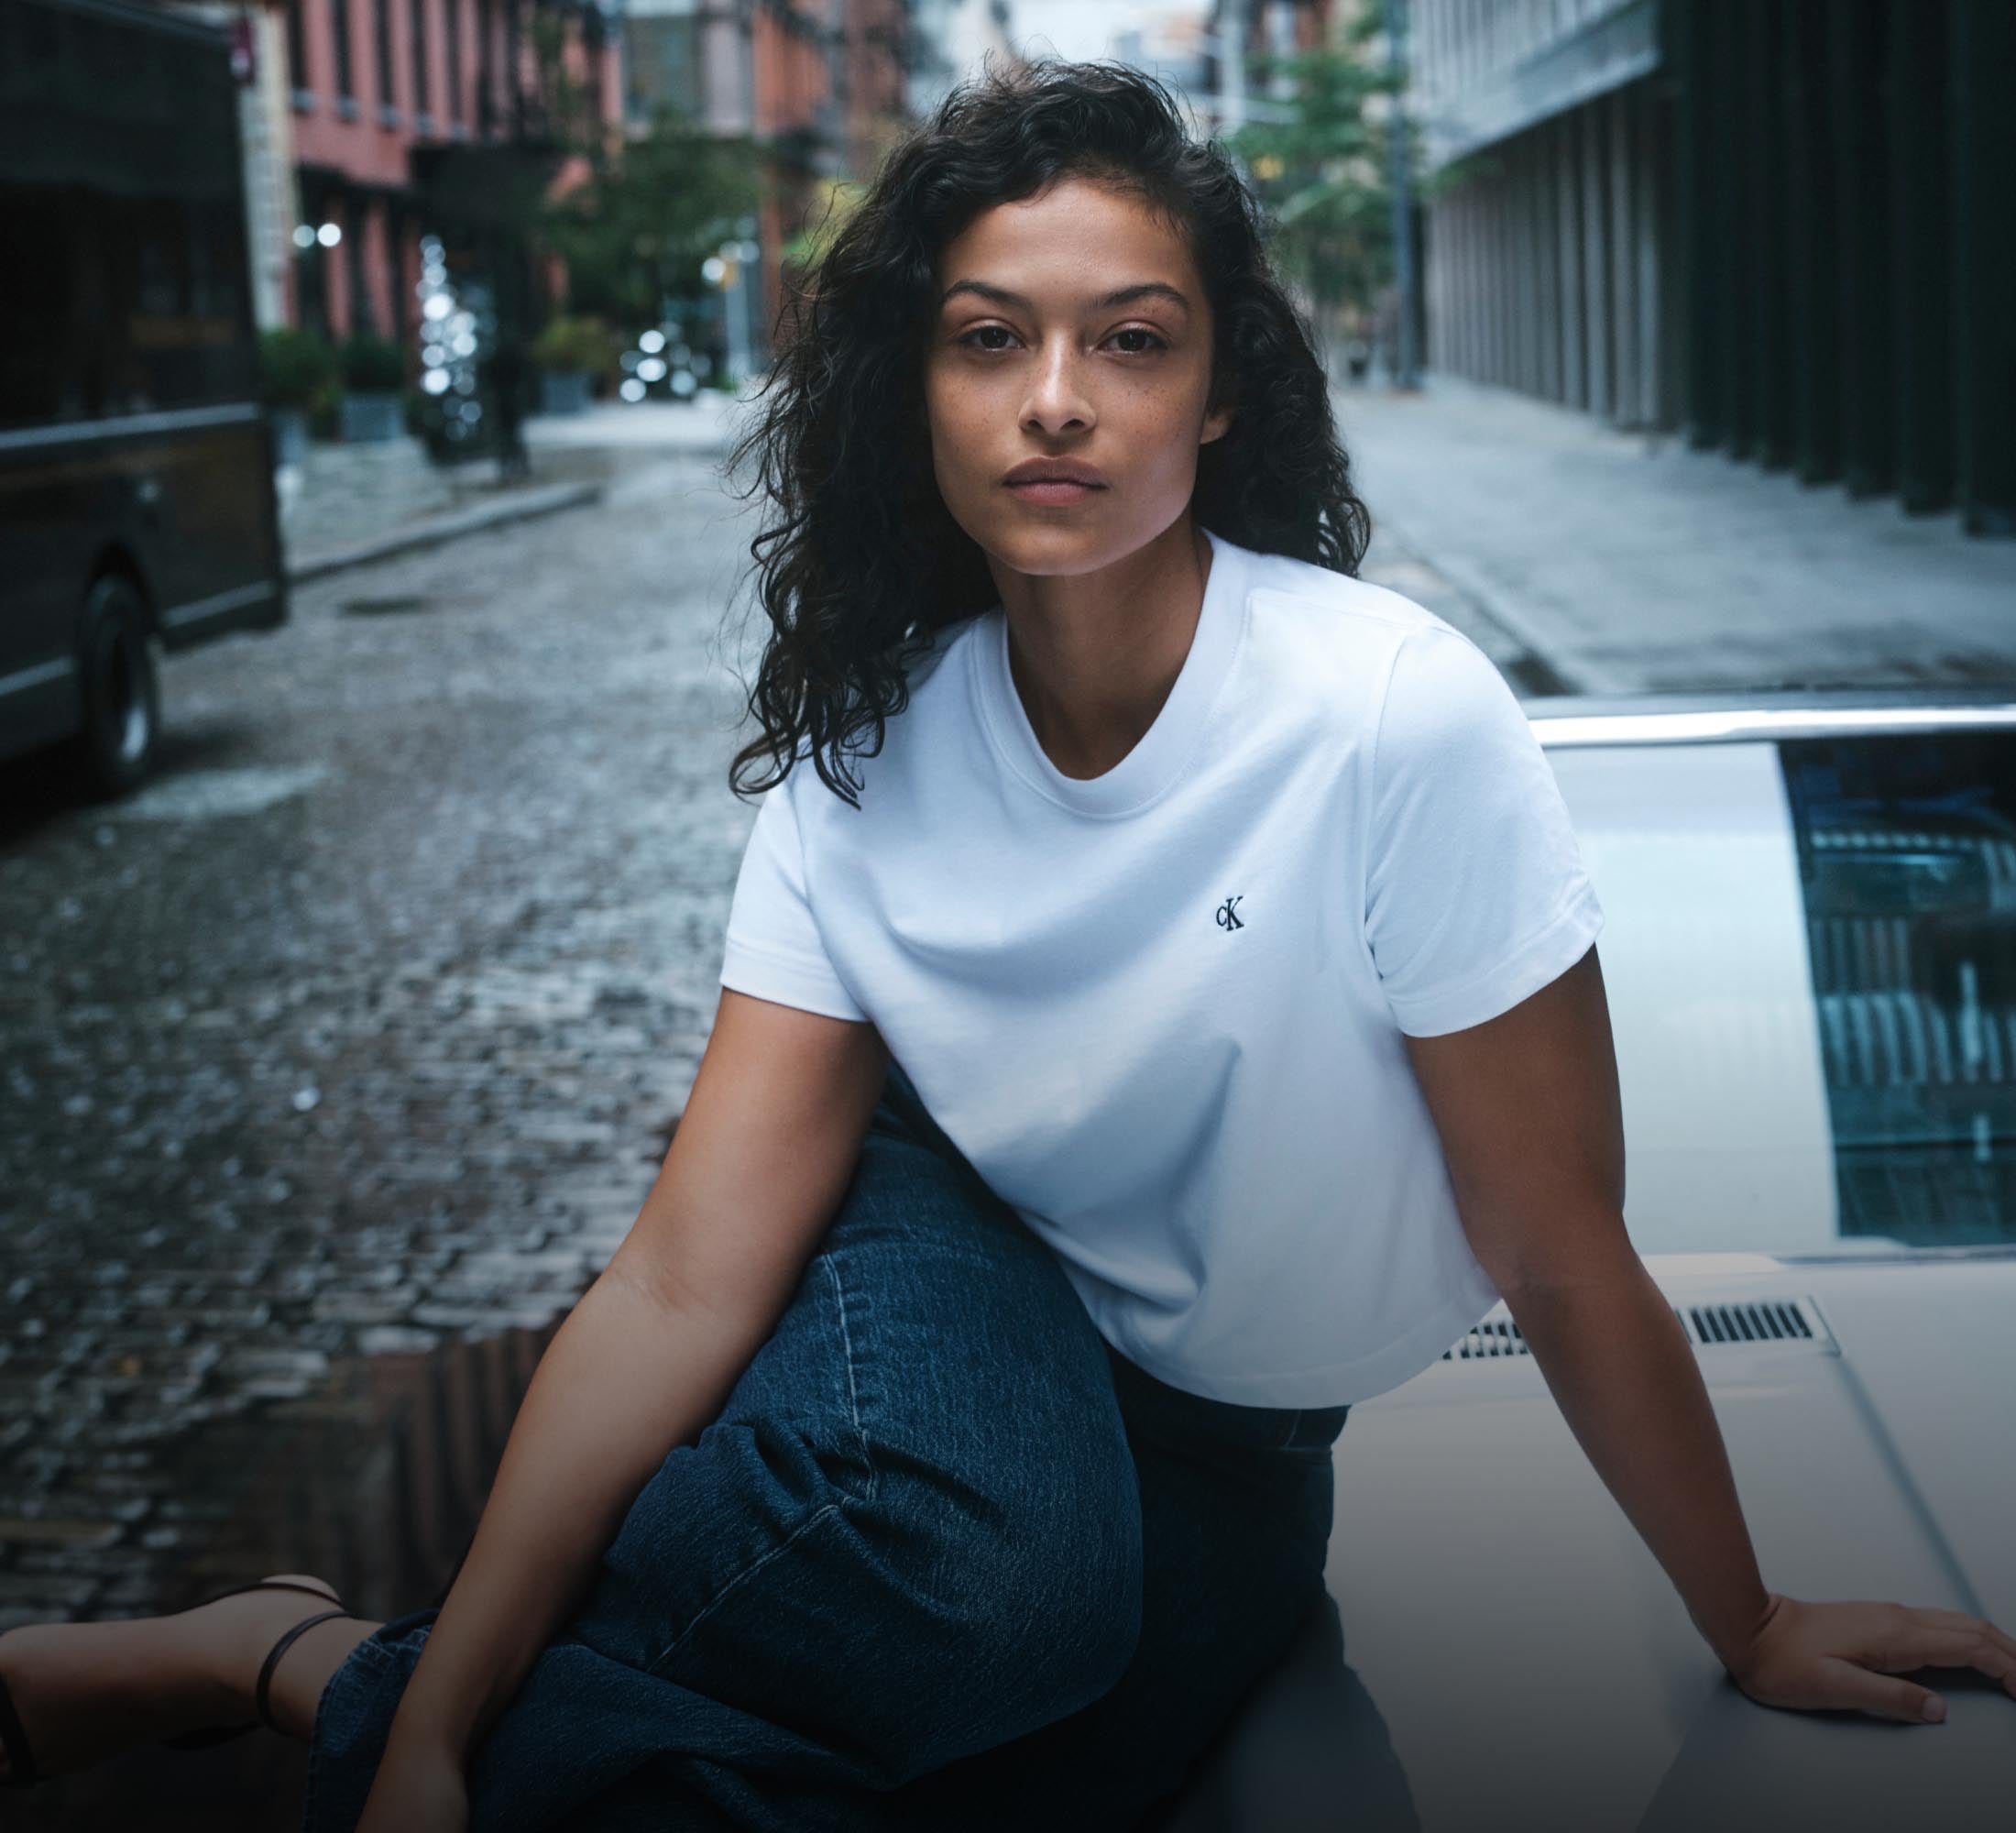 Woman sitting on the hood of a car wearing a white CK logo t-shirt and blue jeans